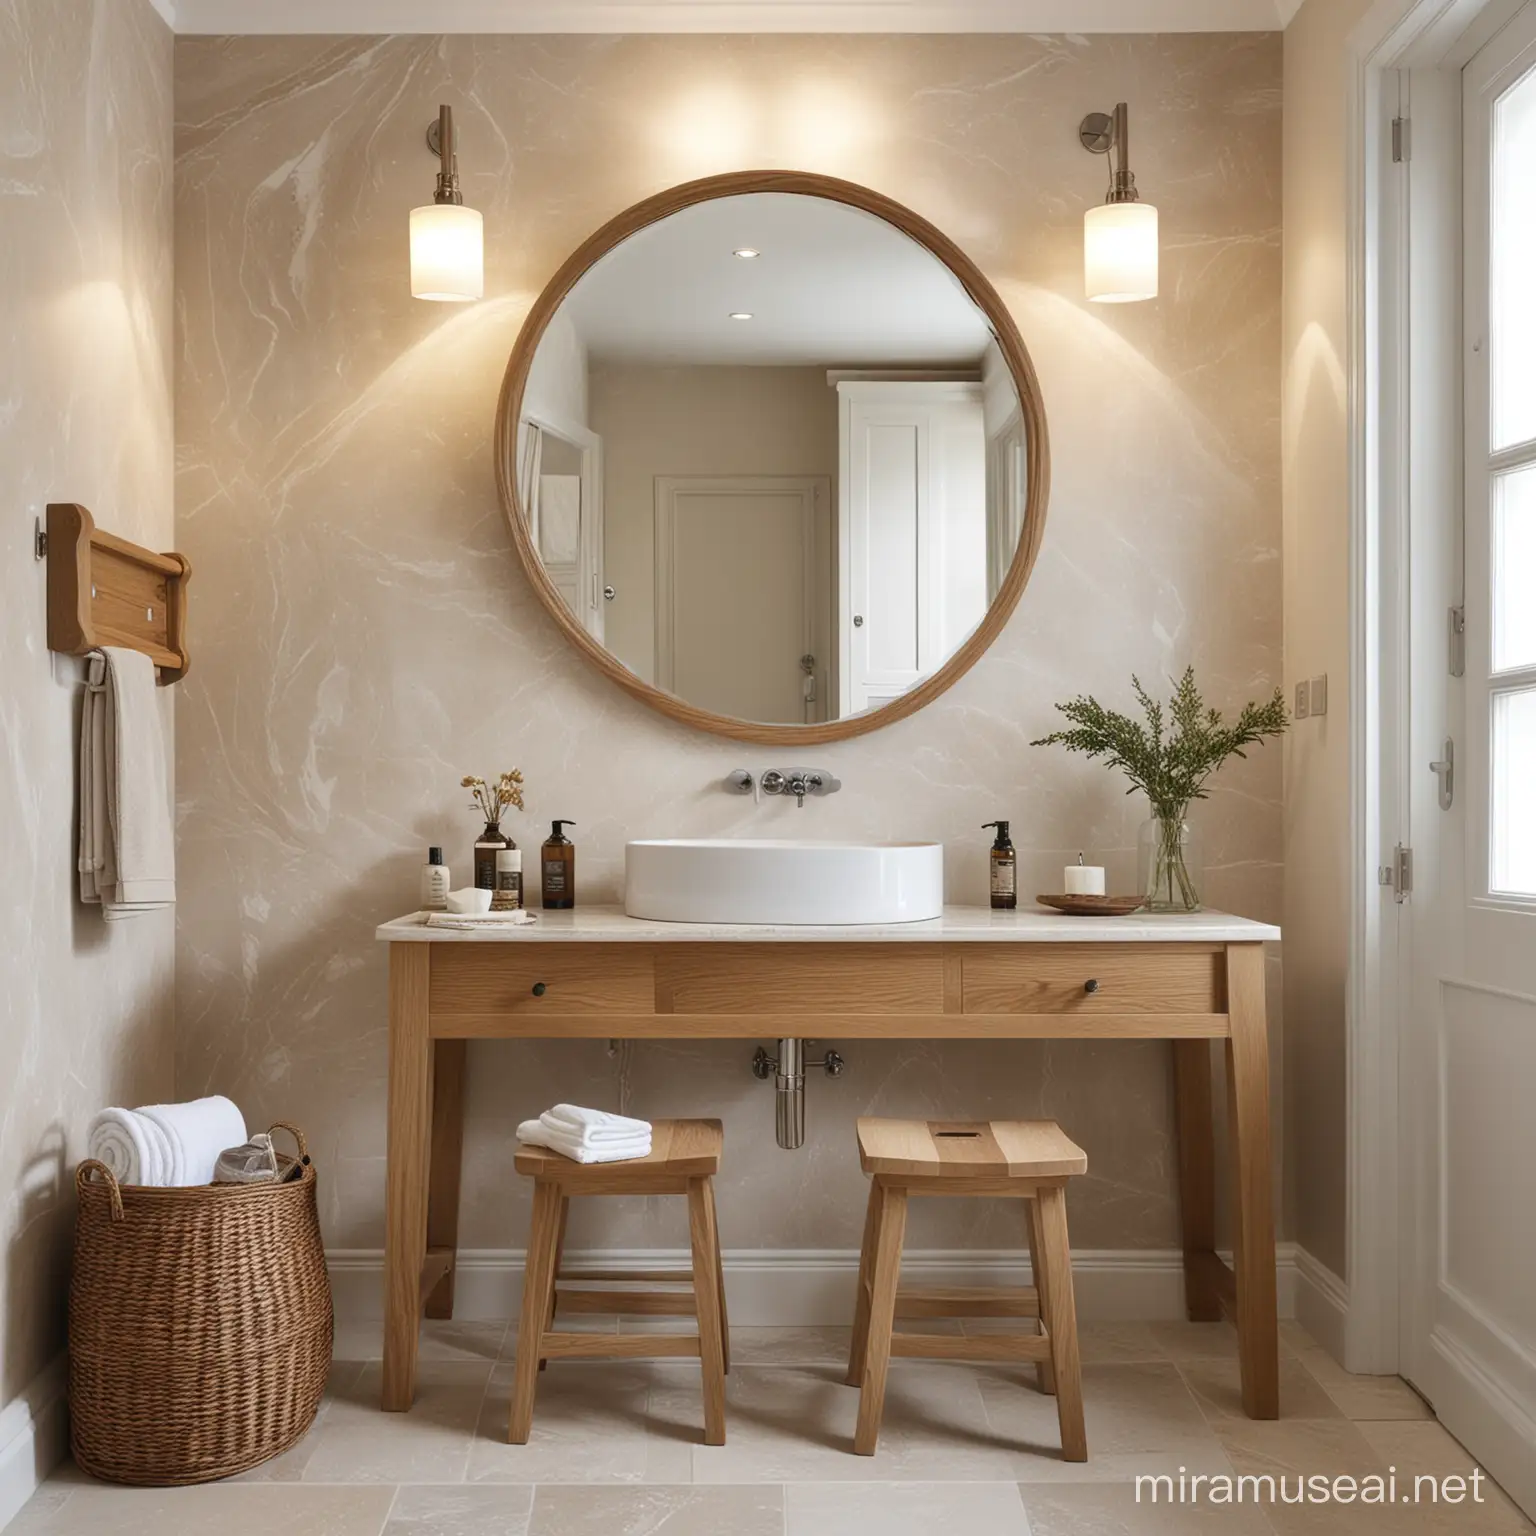 CountryStyle Oak Bathroom with White and Cream Accents